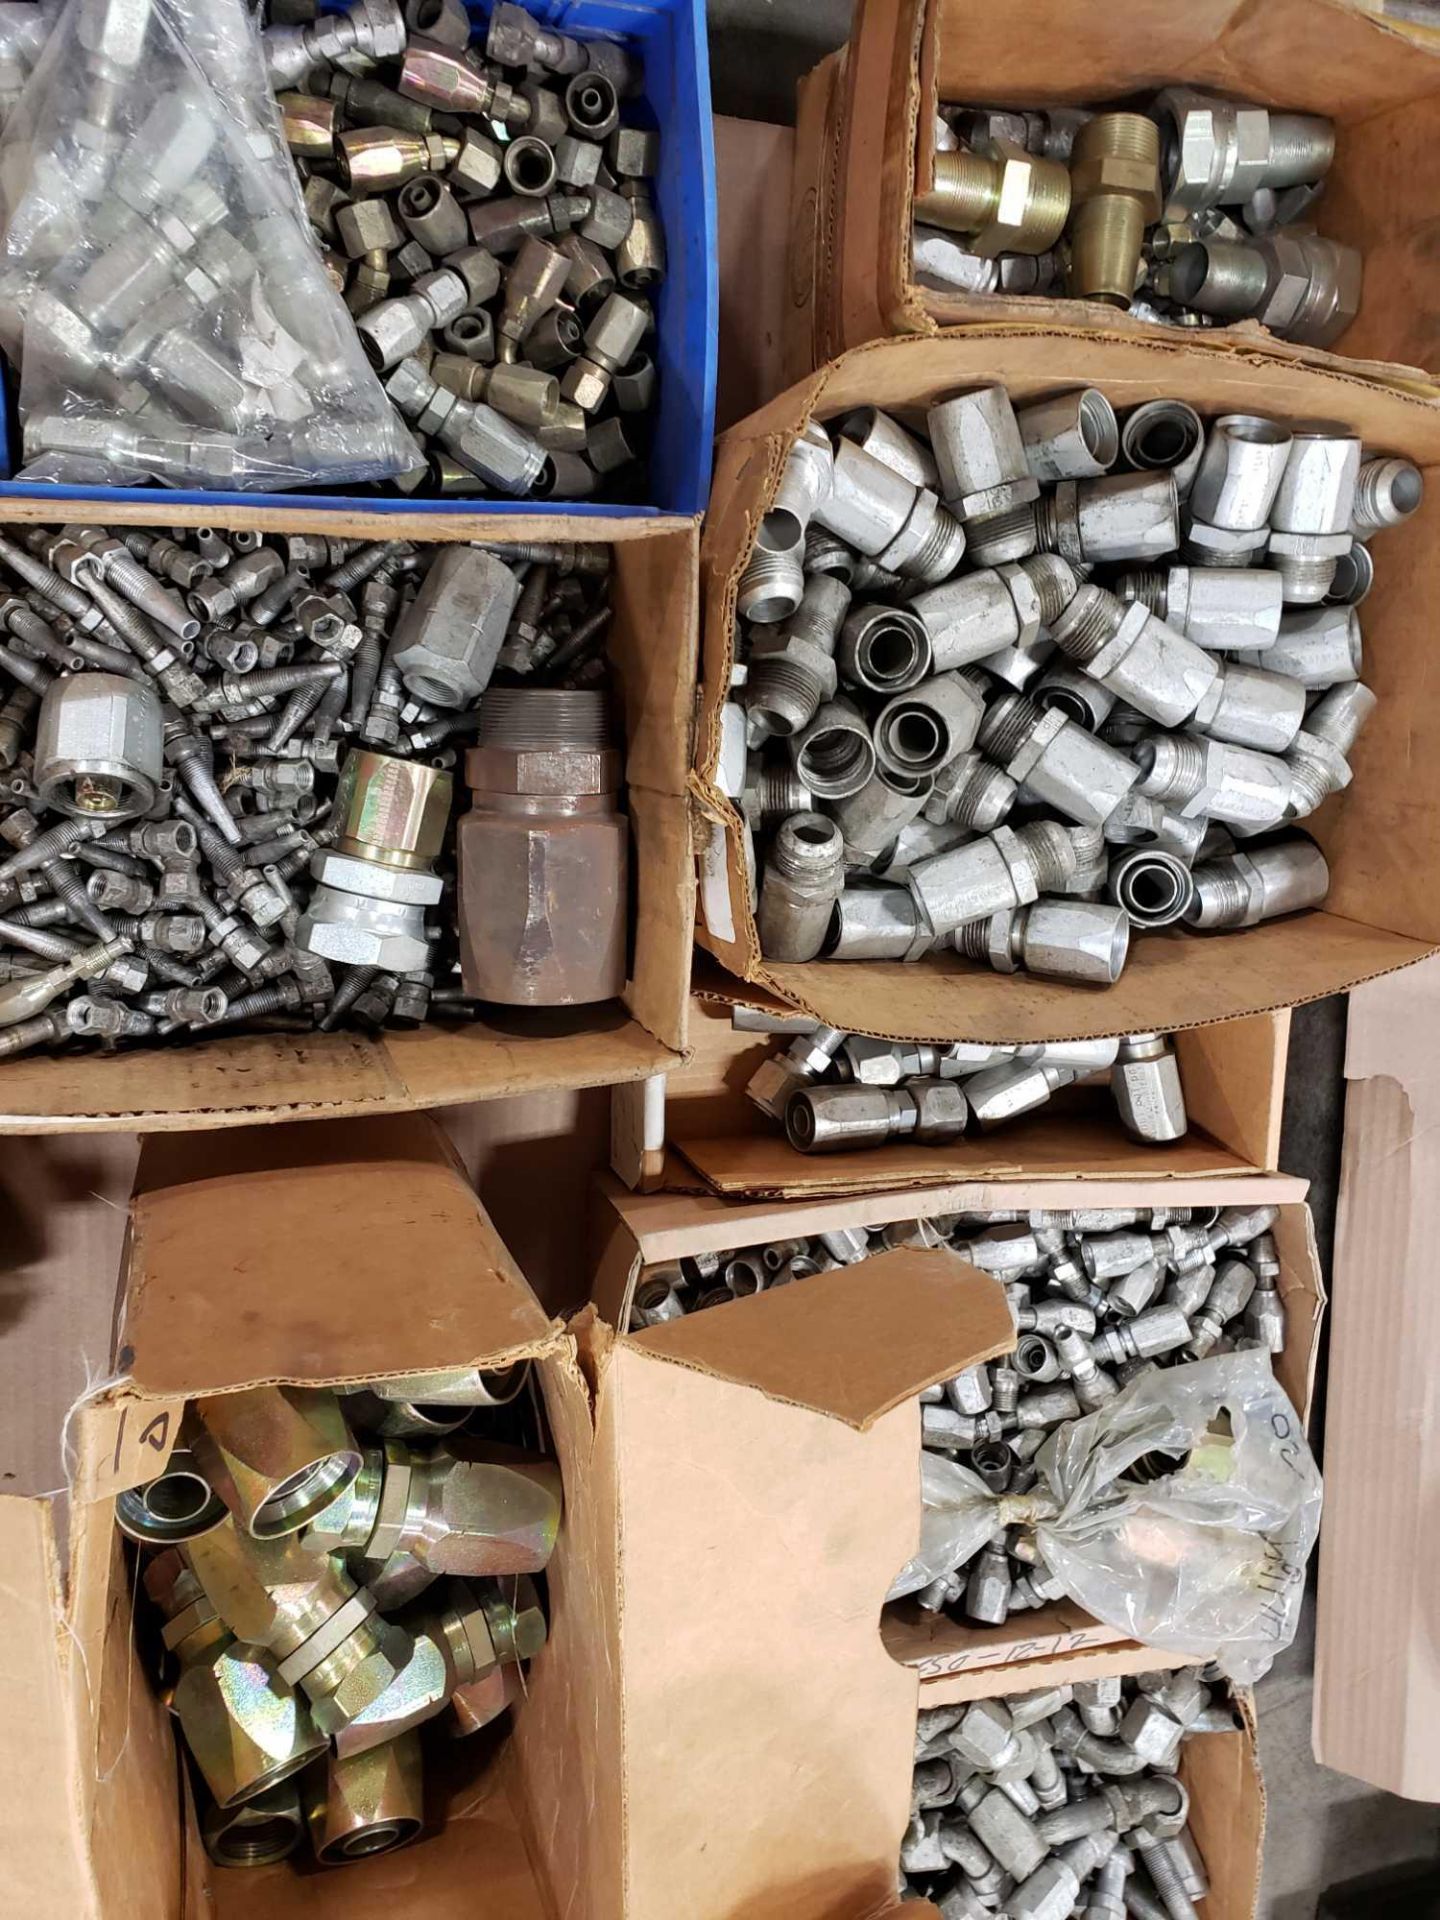 Pallet of assorted hydraulic fittings. - Image 2 of 4